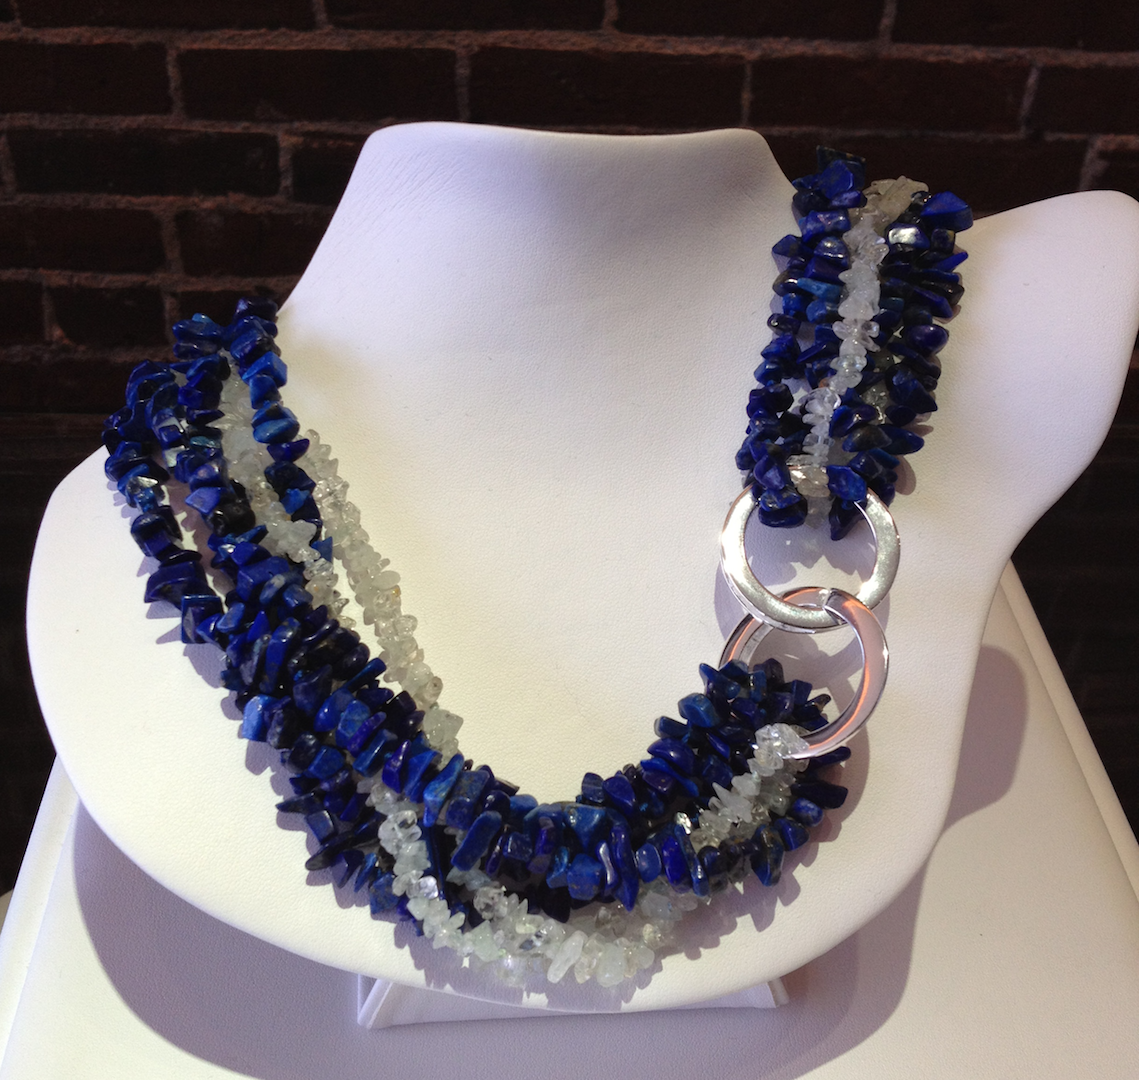 Lapis and aquamarine beads with a sterling silver catch